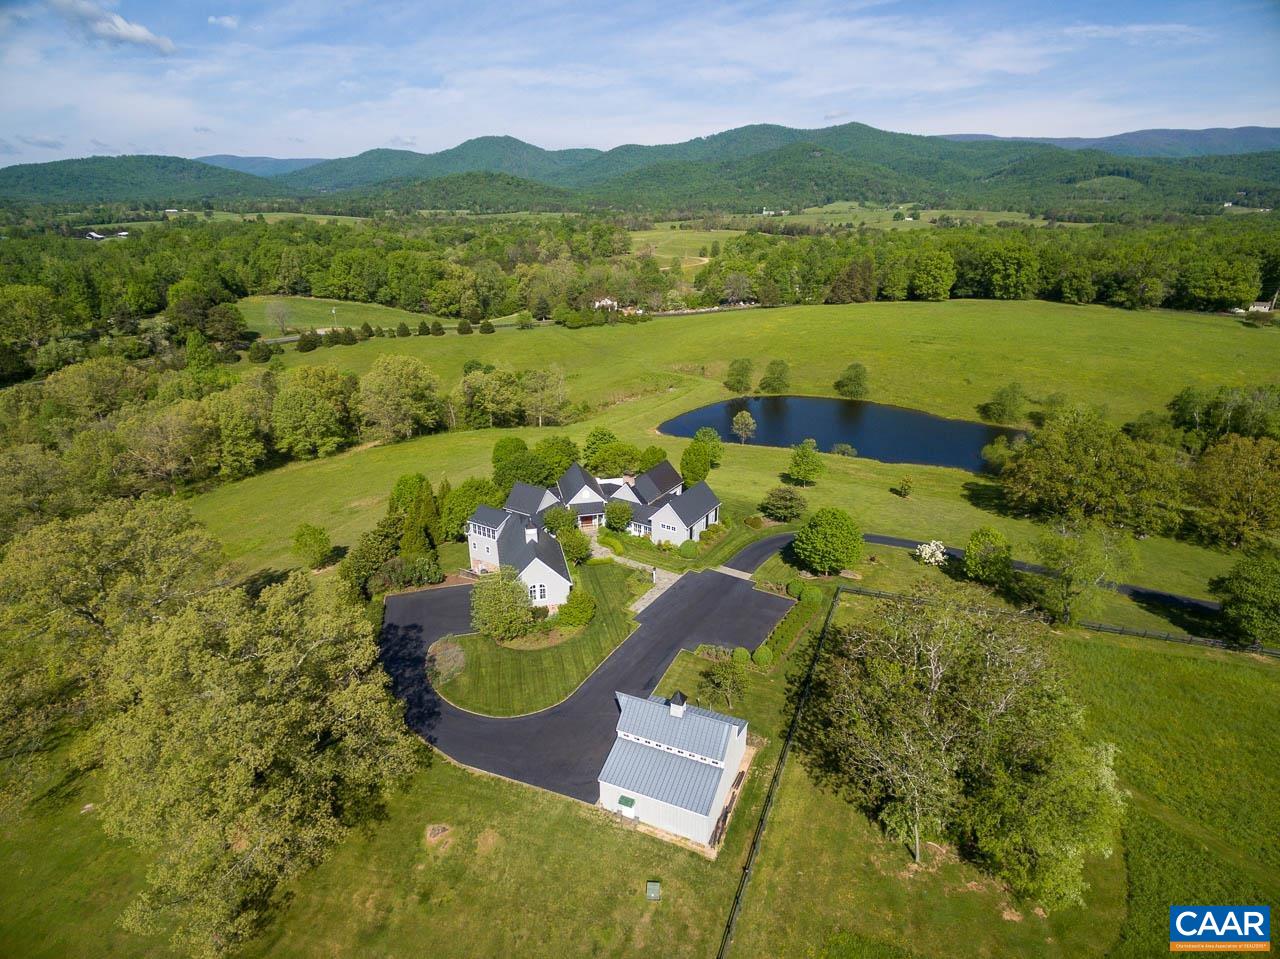 Grey Oaks - a spectacular country estate offering total privacy from over 53 pristine acres in Free Union. Three parcels of gently rolling land, mostly open w/streams, lush meadows, majestic oak trees, Blue Ridge views and two ponds (one is approx. 2 acres). The heart of the property showcases a stunning custom-designed residence, built by Shelter Associates, w/6 BR (one currently serves as an office), 6.5 BA, spacious chef's kitchen w/center-island, lovely dining room and breakfast room, cozy paneled den, and great room w/soaring exposed-beam ceiling and fireplace. The vaulted entry foyer is flanked by two light-filled gallery halls; one providing access to the luxurious master bedroom suite and the second leading to guest/in-law/teenager living quarters comprised of 3 BR, 3 BA, a full kitchen, dining area, and a loft/family room w/fireplace. Superior finishes, details and craftsmanship inside and out; floor-to-ceiling windows, hardwood and limestone flooring, built-ins, extensive decking and porches, just to name a few! 3-bay attached garage, 1-bay attached garage, ample storage, and a 1,800± sf  barn. Property is not under conservation easement. Located approximately 15 miles NW of UVA and Downtown Charlottesville.